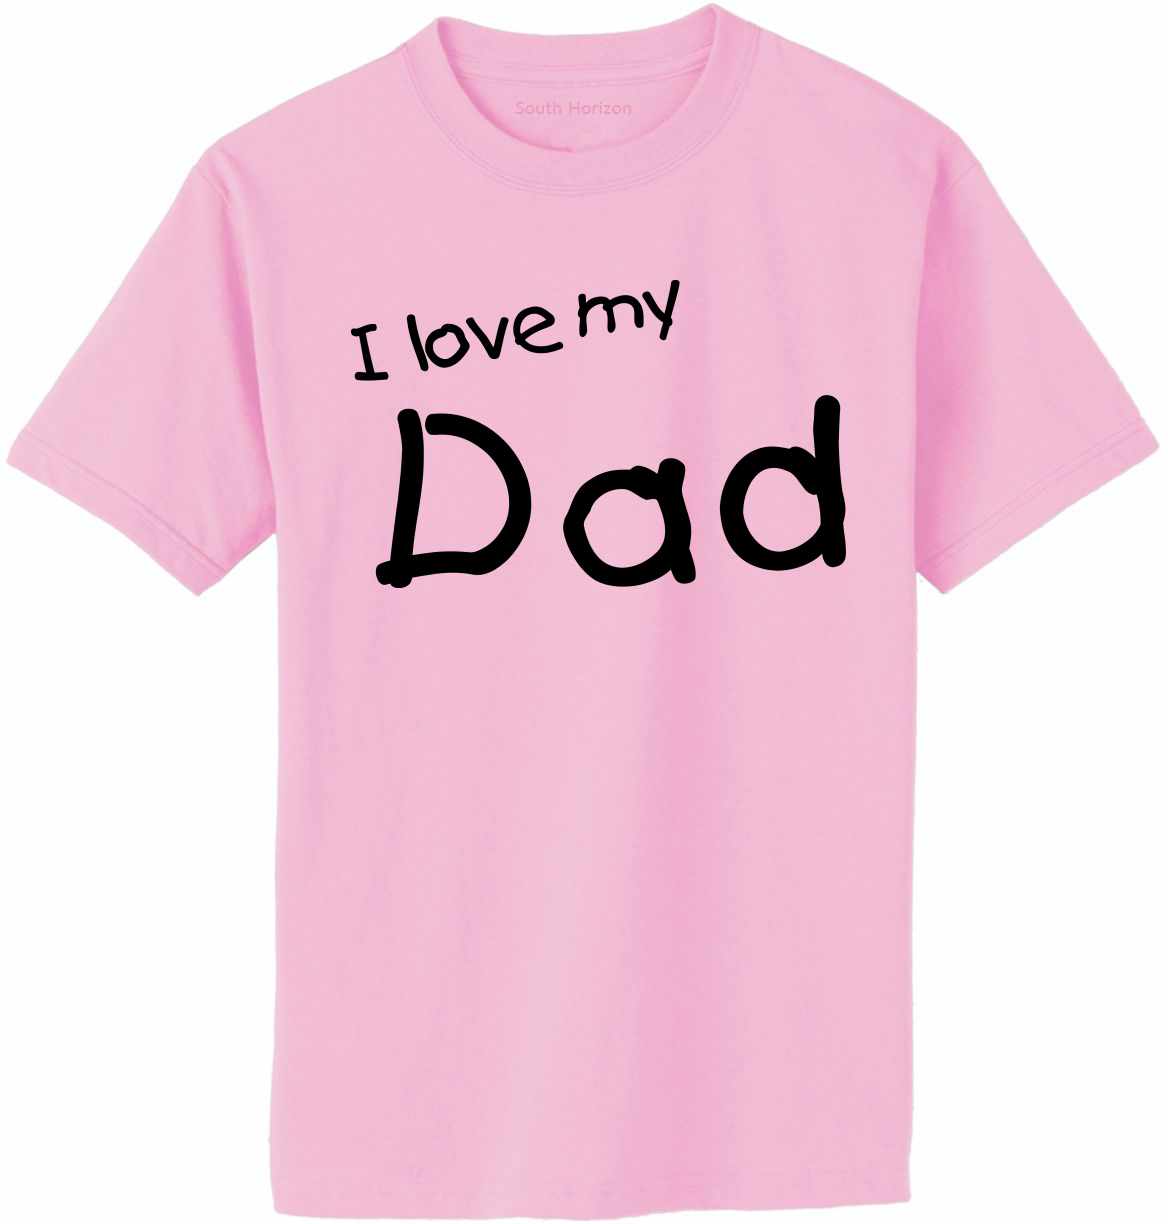 I Love My Dad on Adult T-Shirt (#1210-1)